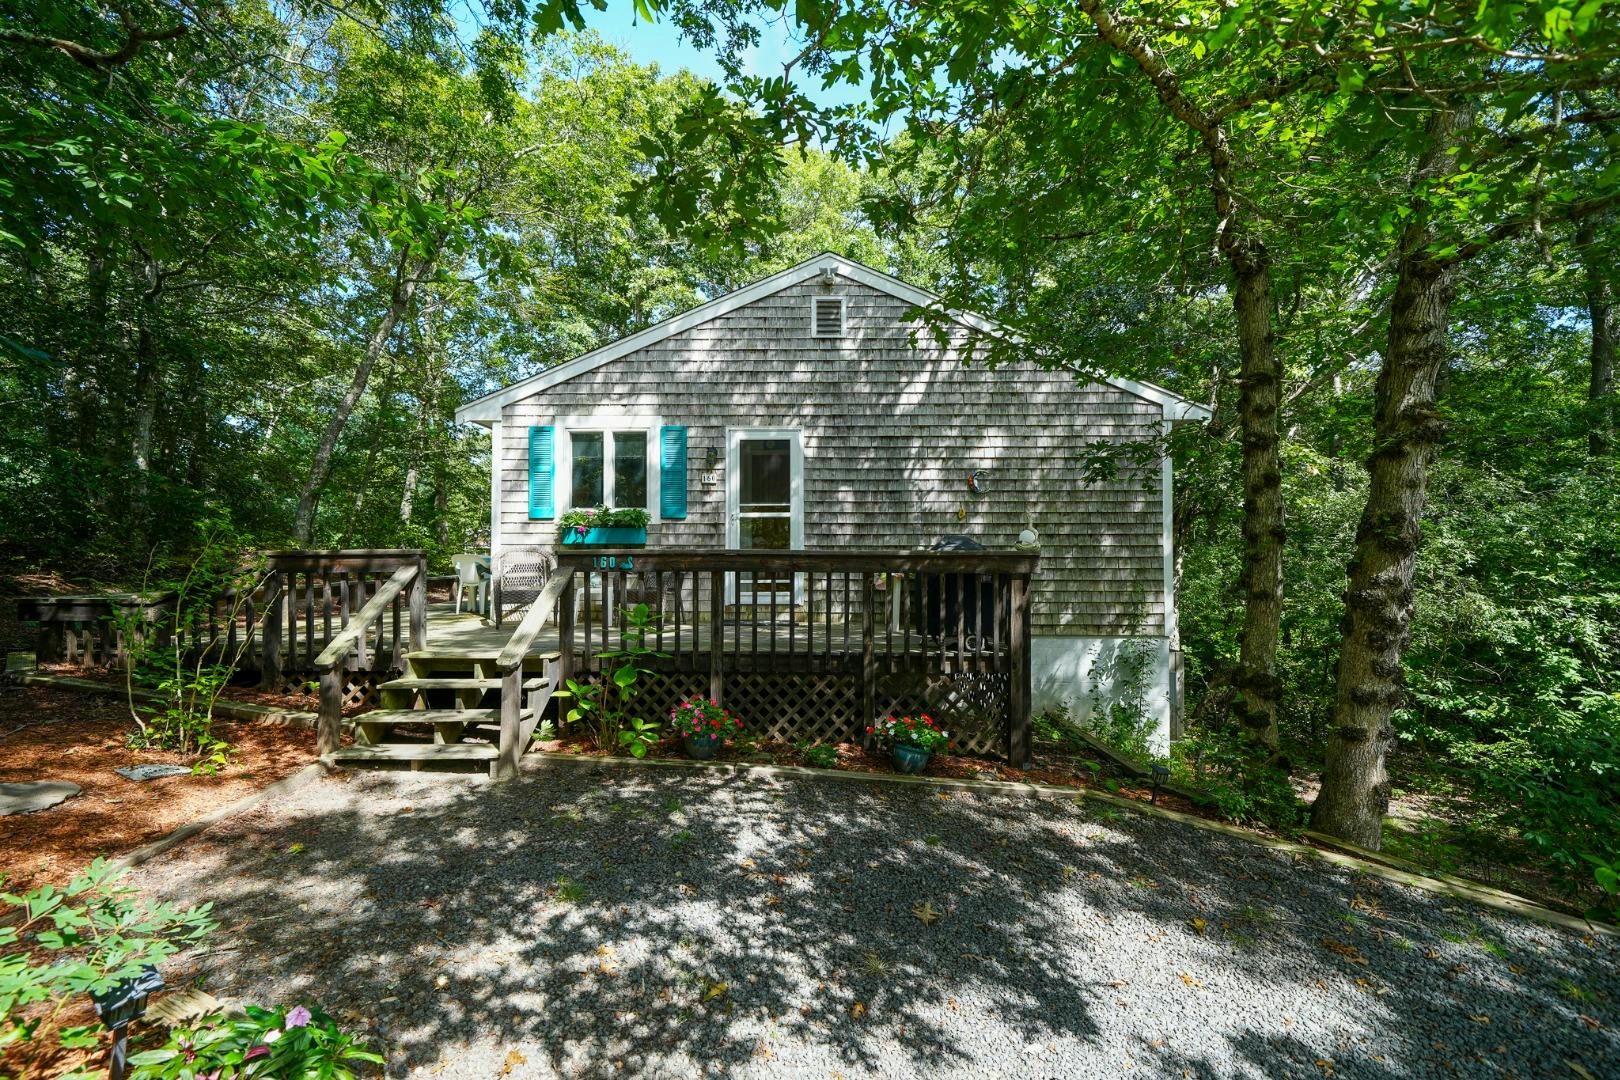 160-spring-hill-road-vineyard-haven-ma-02568-41206